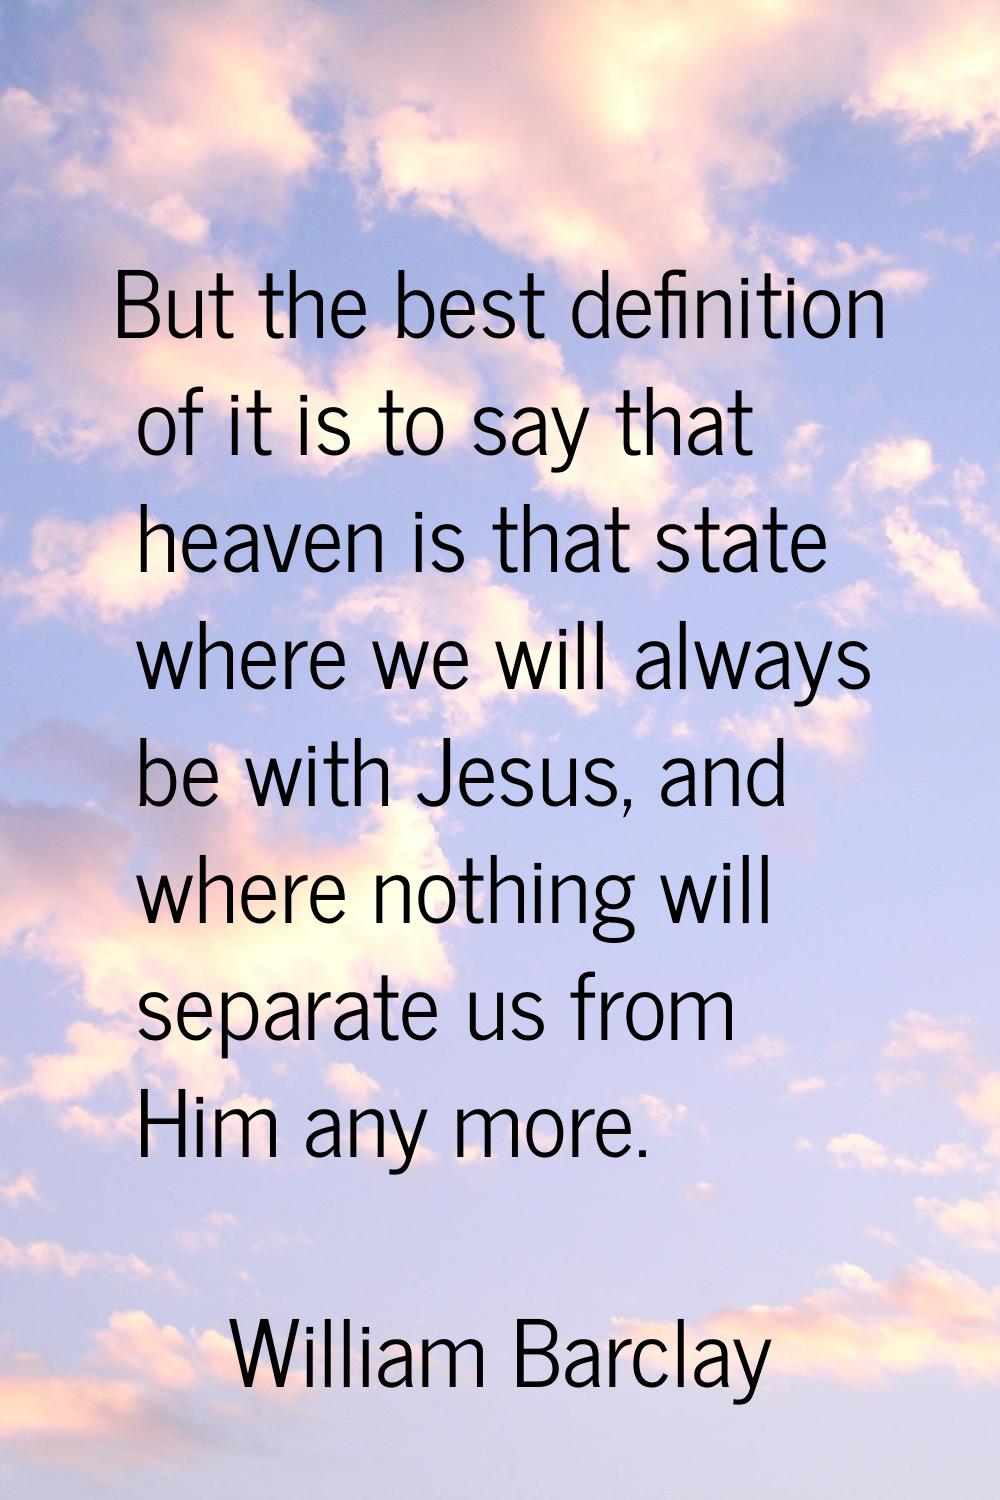 But the best definition of it is to say that heaven is that state where we will always be with Jesu